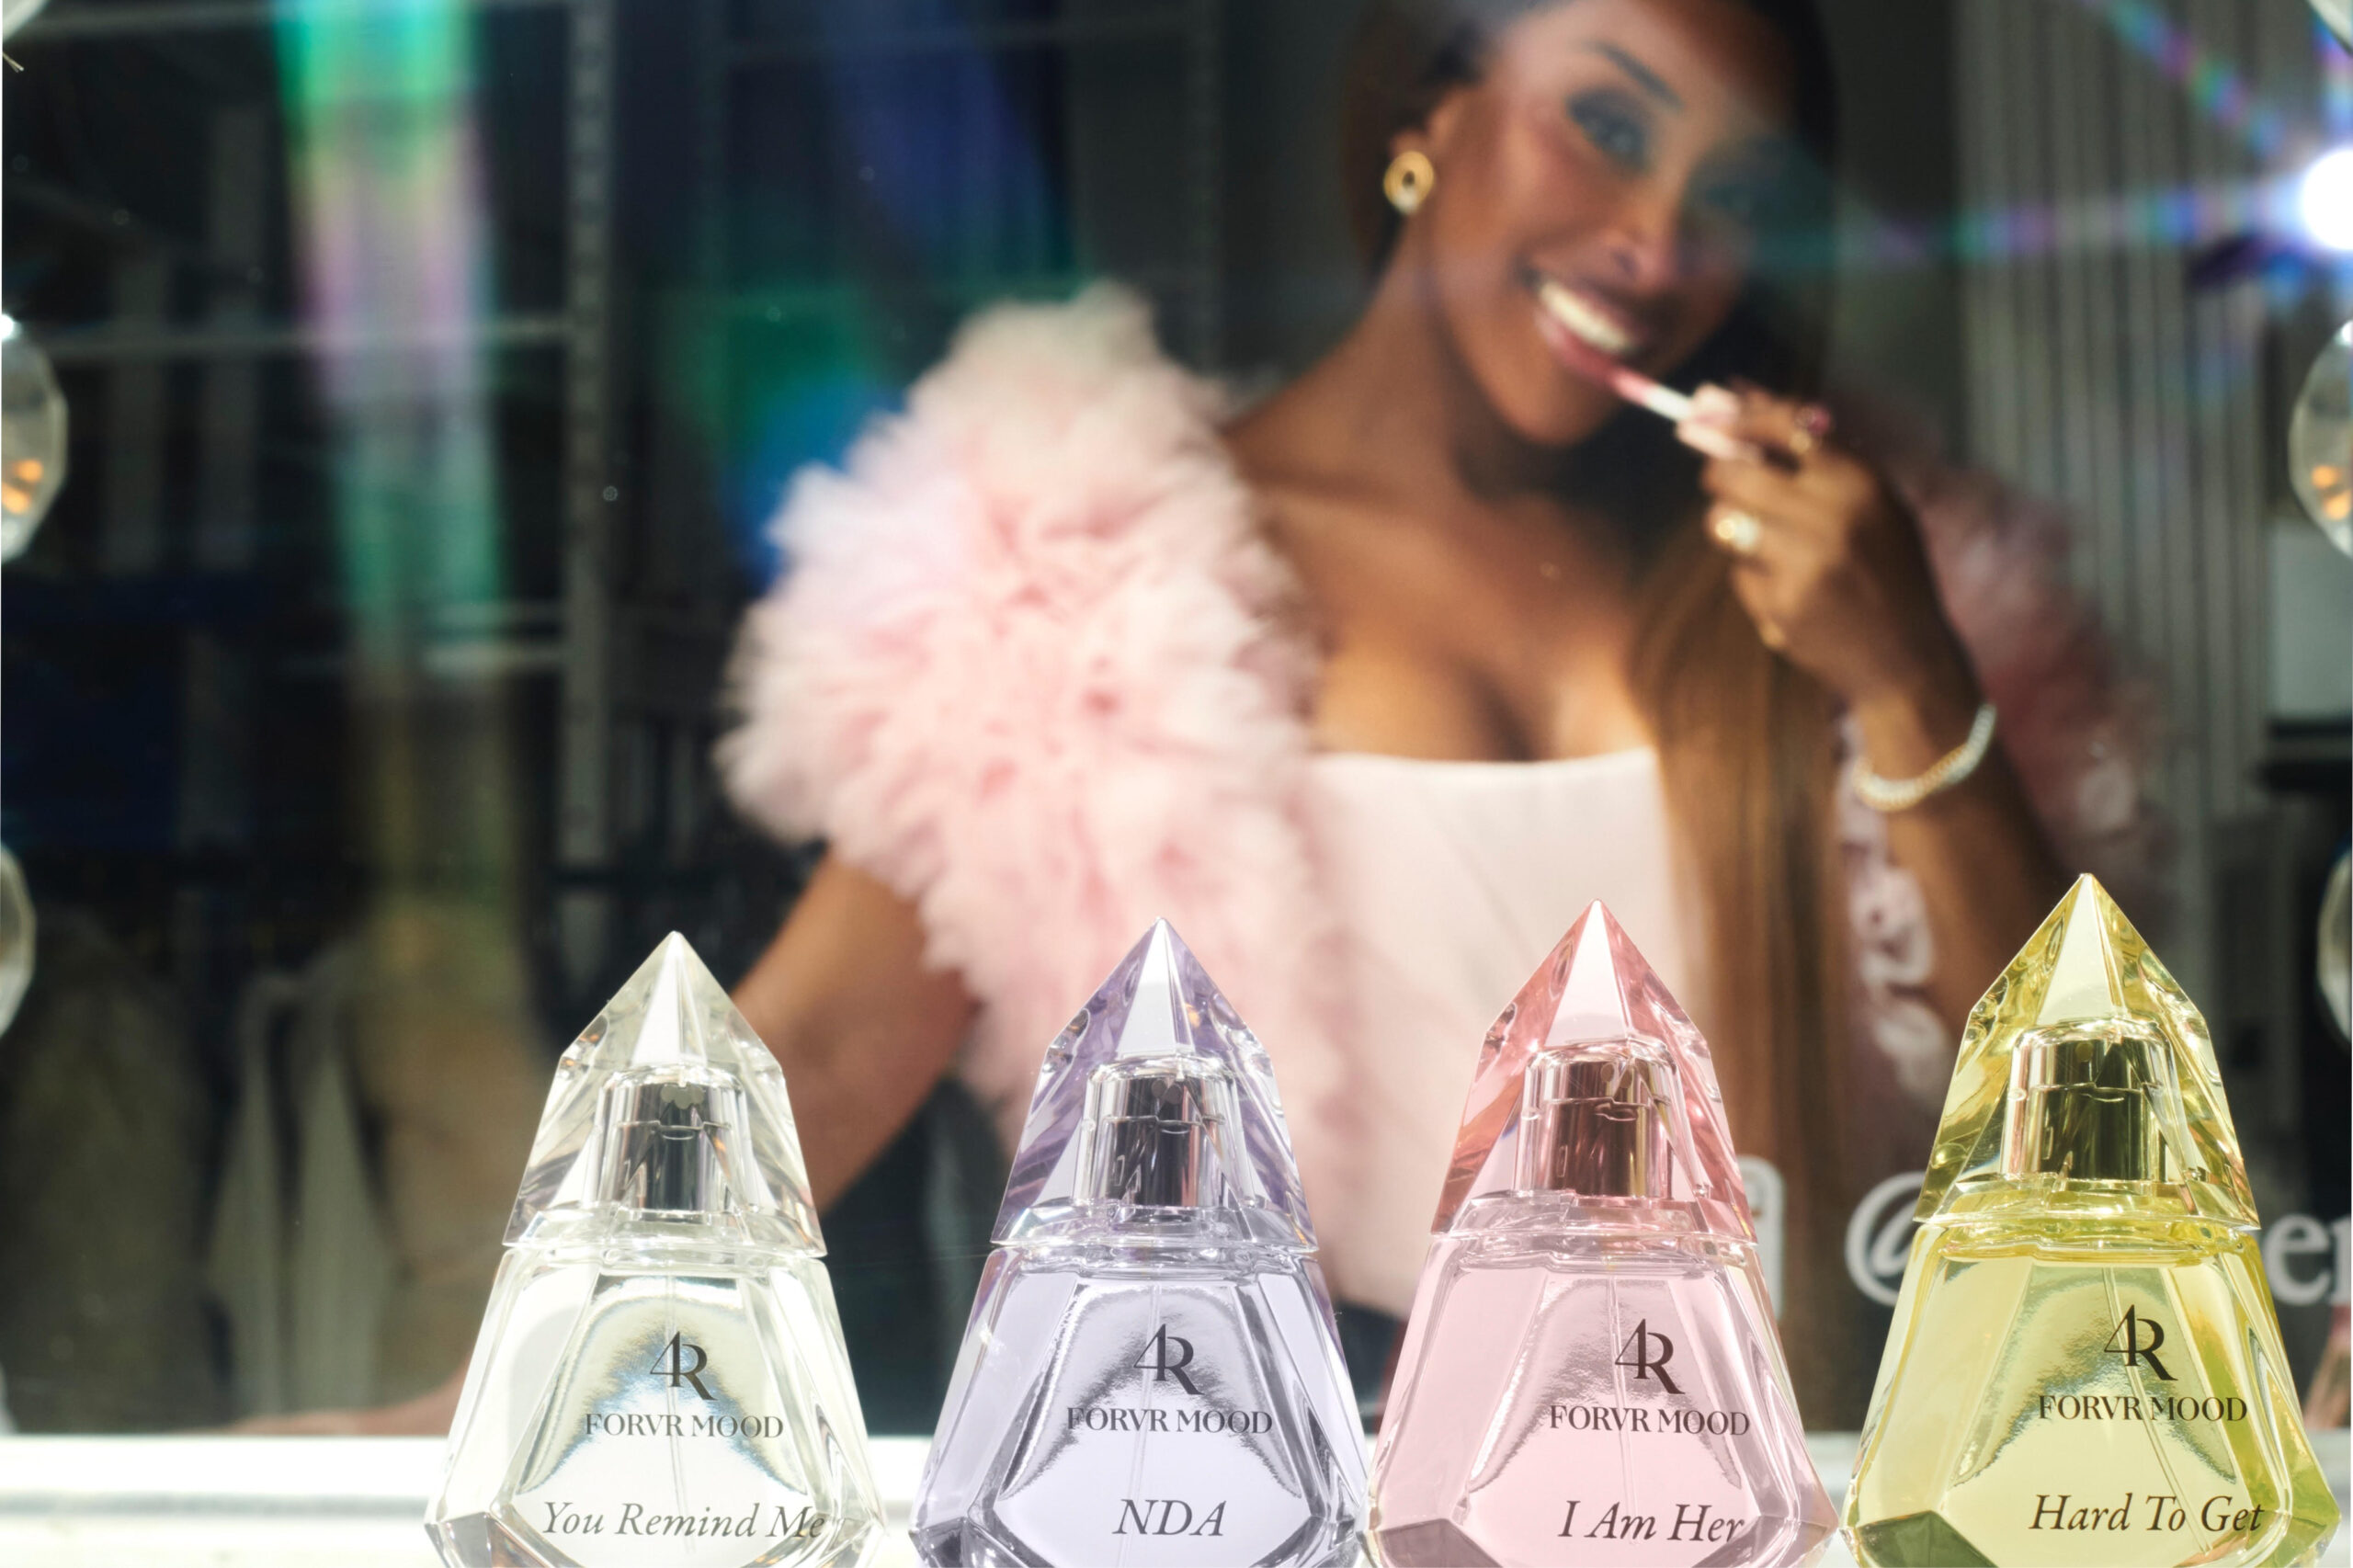 FORVR MOOD LAUNCHES NEW FINE FRAGRANCE COLLECTION JUST IN TIME FOR
SPRING